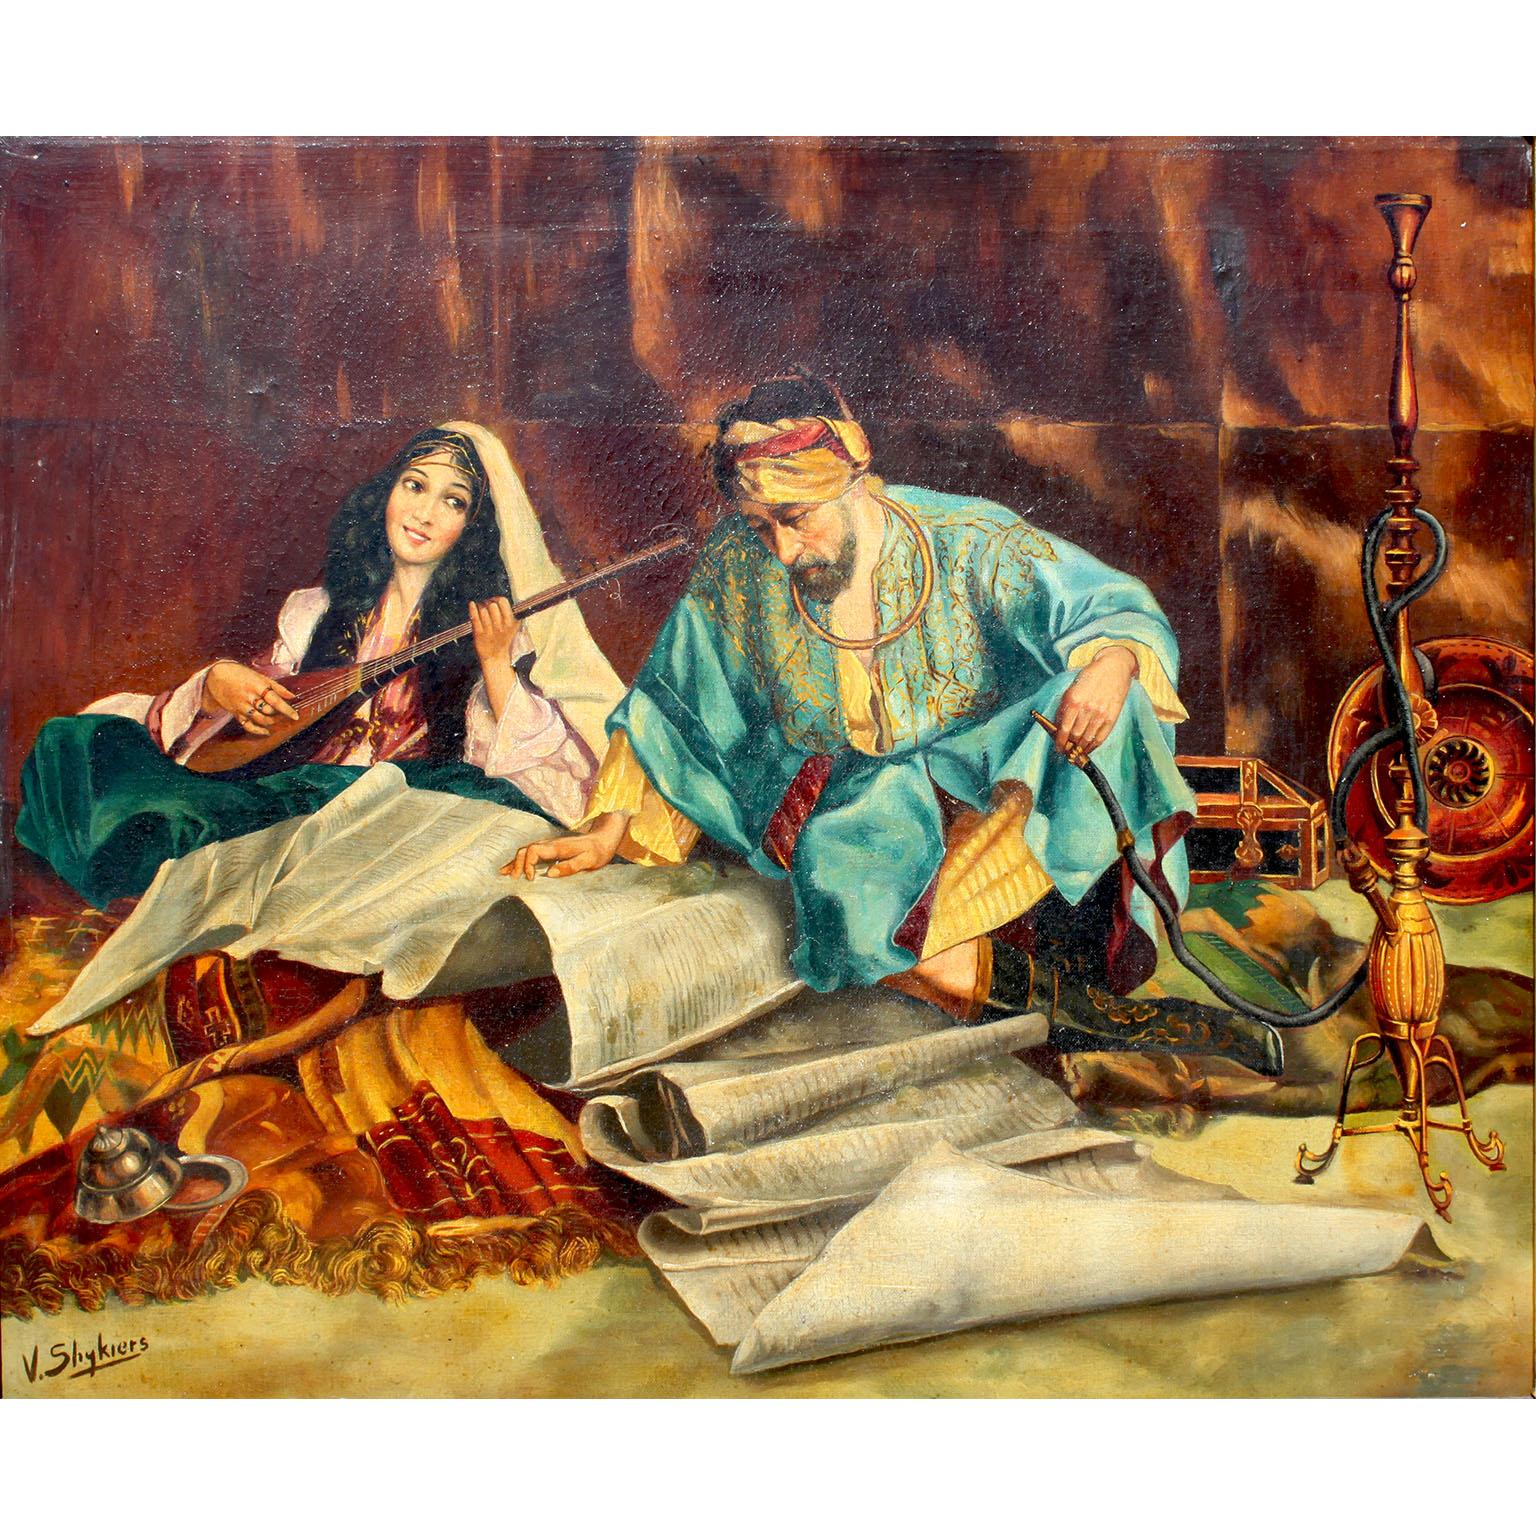 A Continental Early 20th Century Orientalist Oil on Canvas titled 'Le maître de céans et sa favorite' (The master of the house and his favorite), inspired by the original work of Antonio Fabres Y Costa (Spanish, 1854 - 1938). The painting portrays